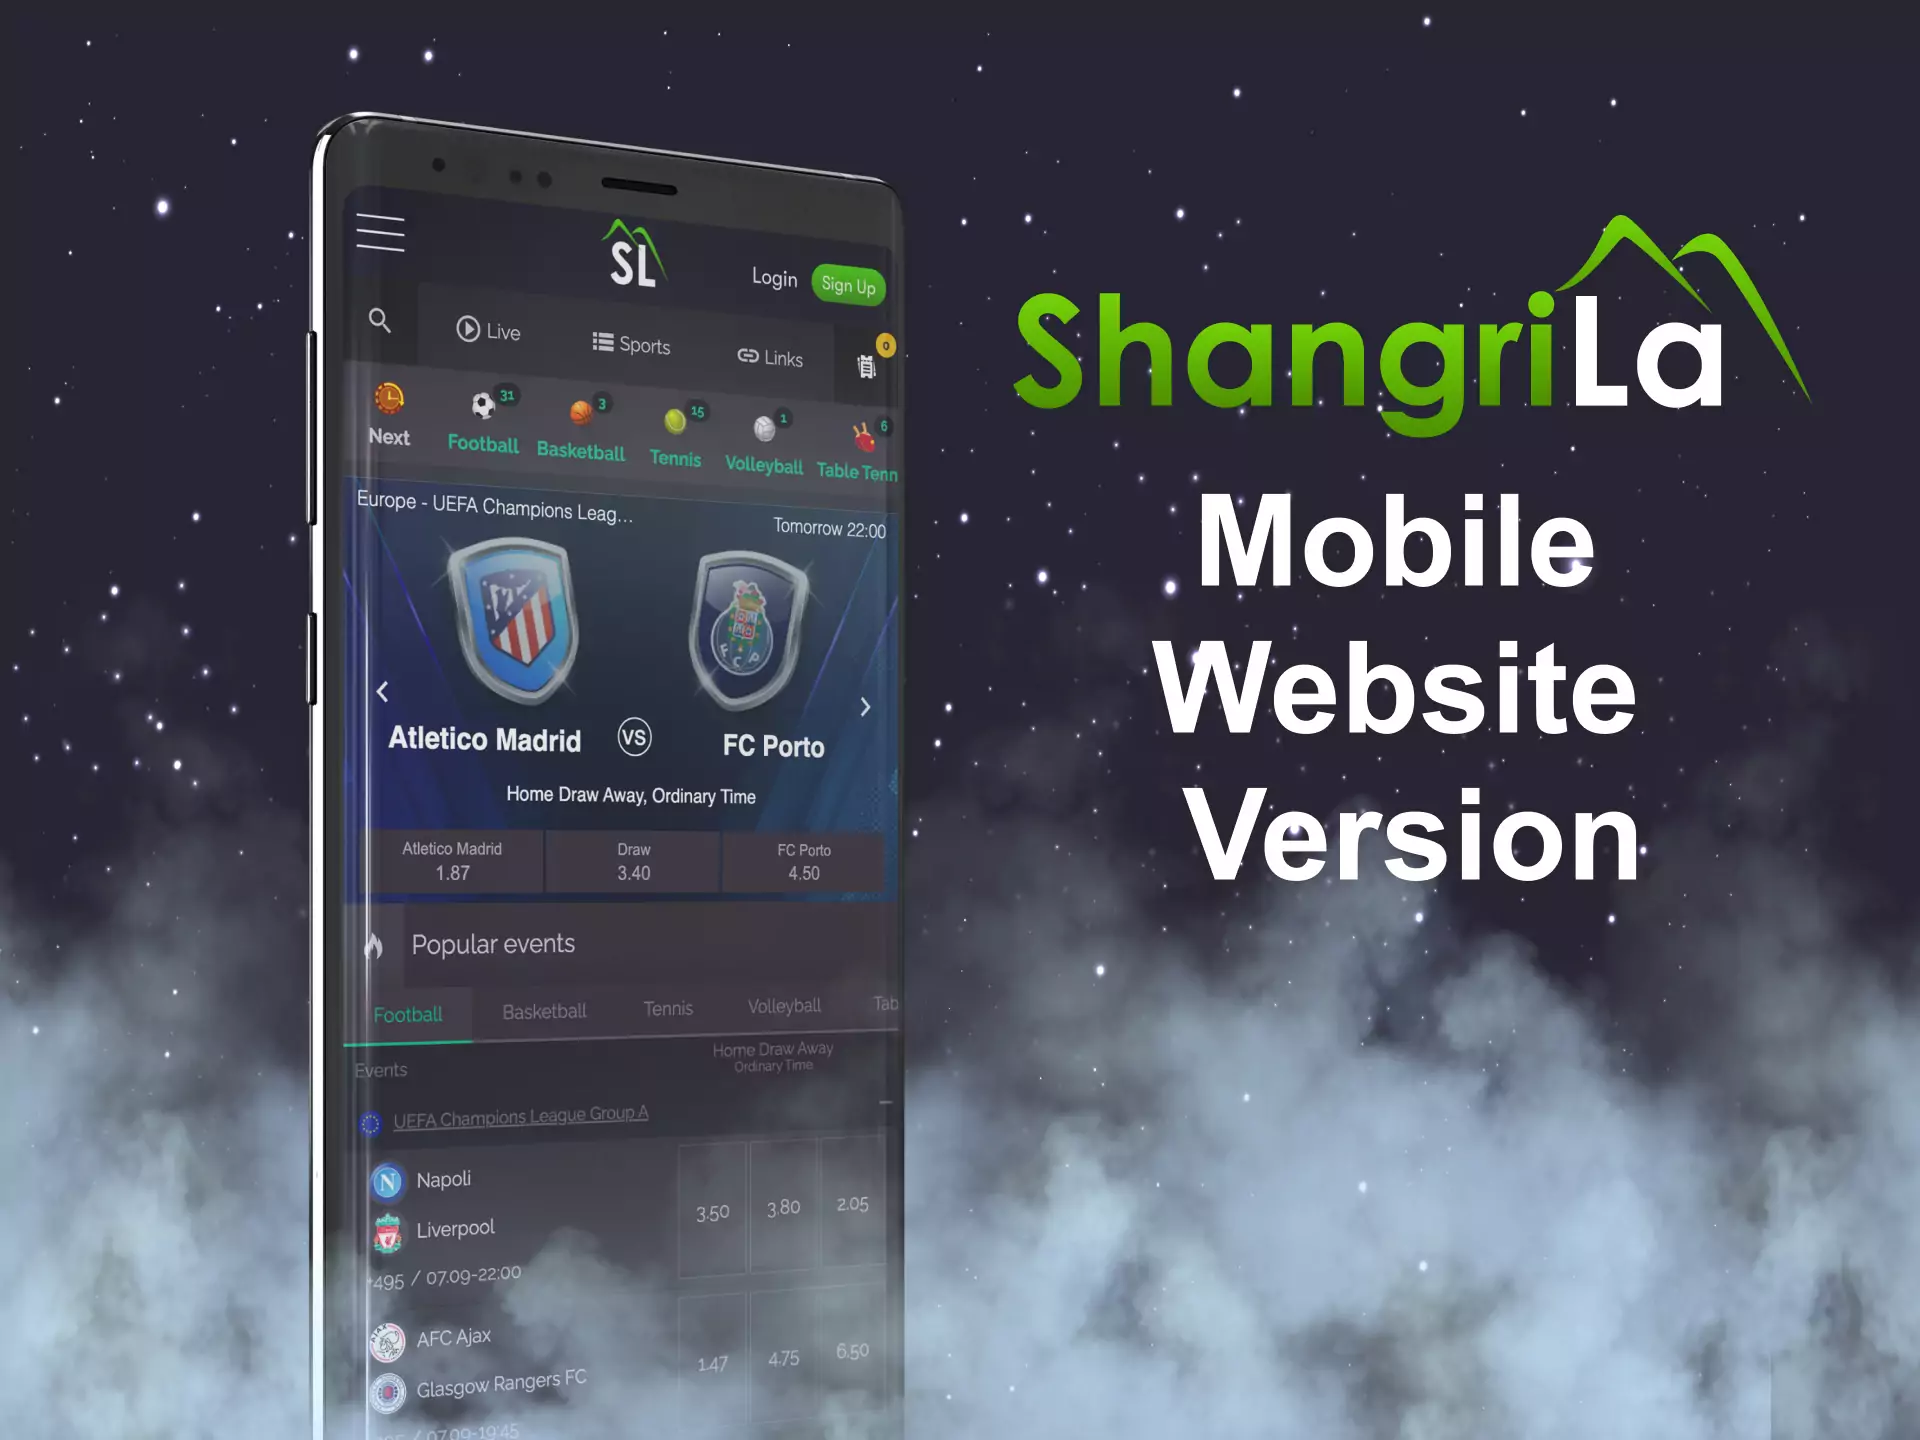 For mobile devices, use the browser version of Shangri La.